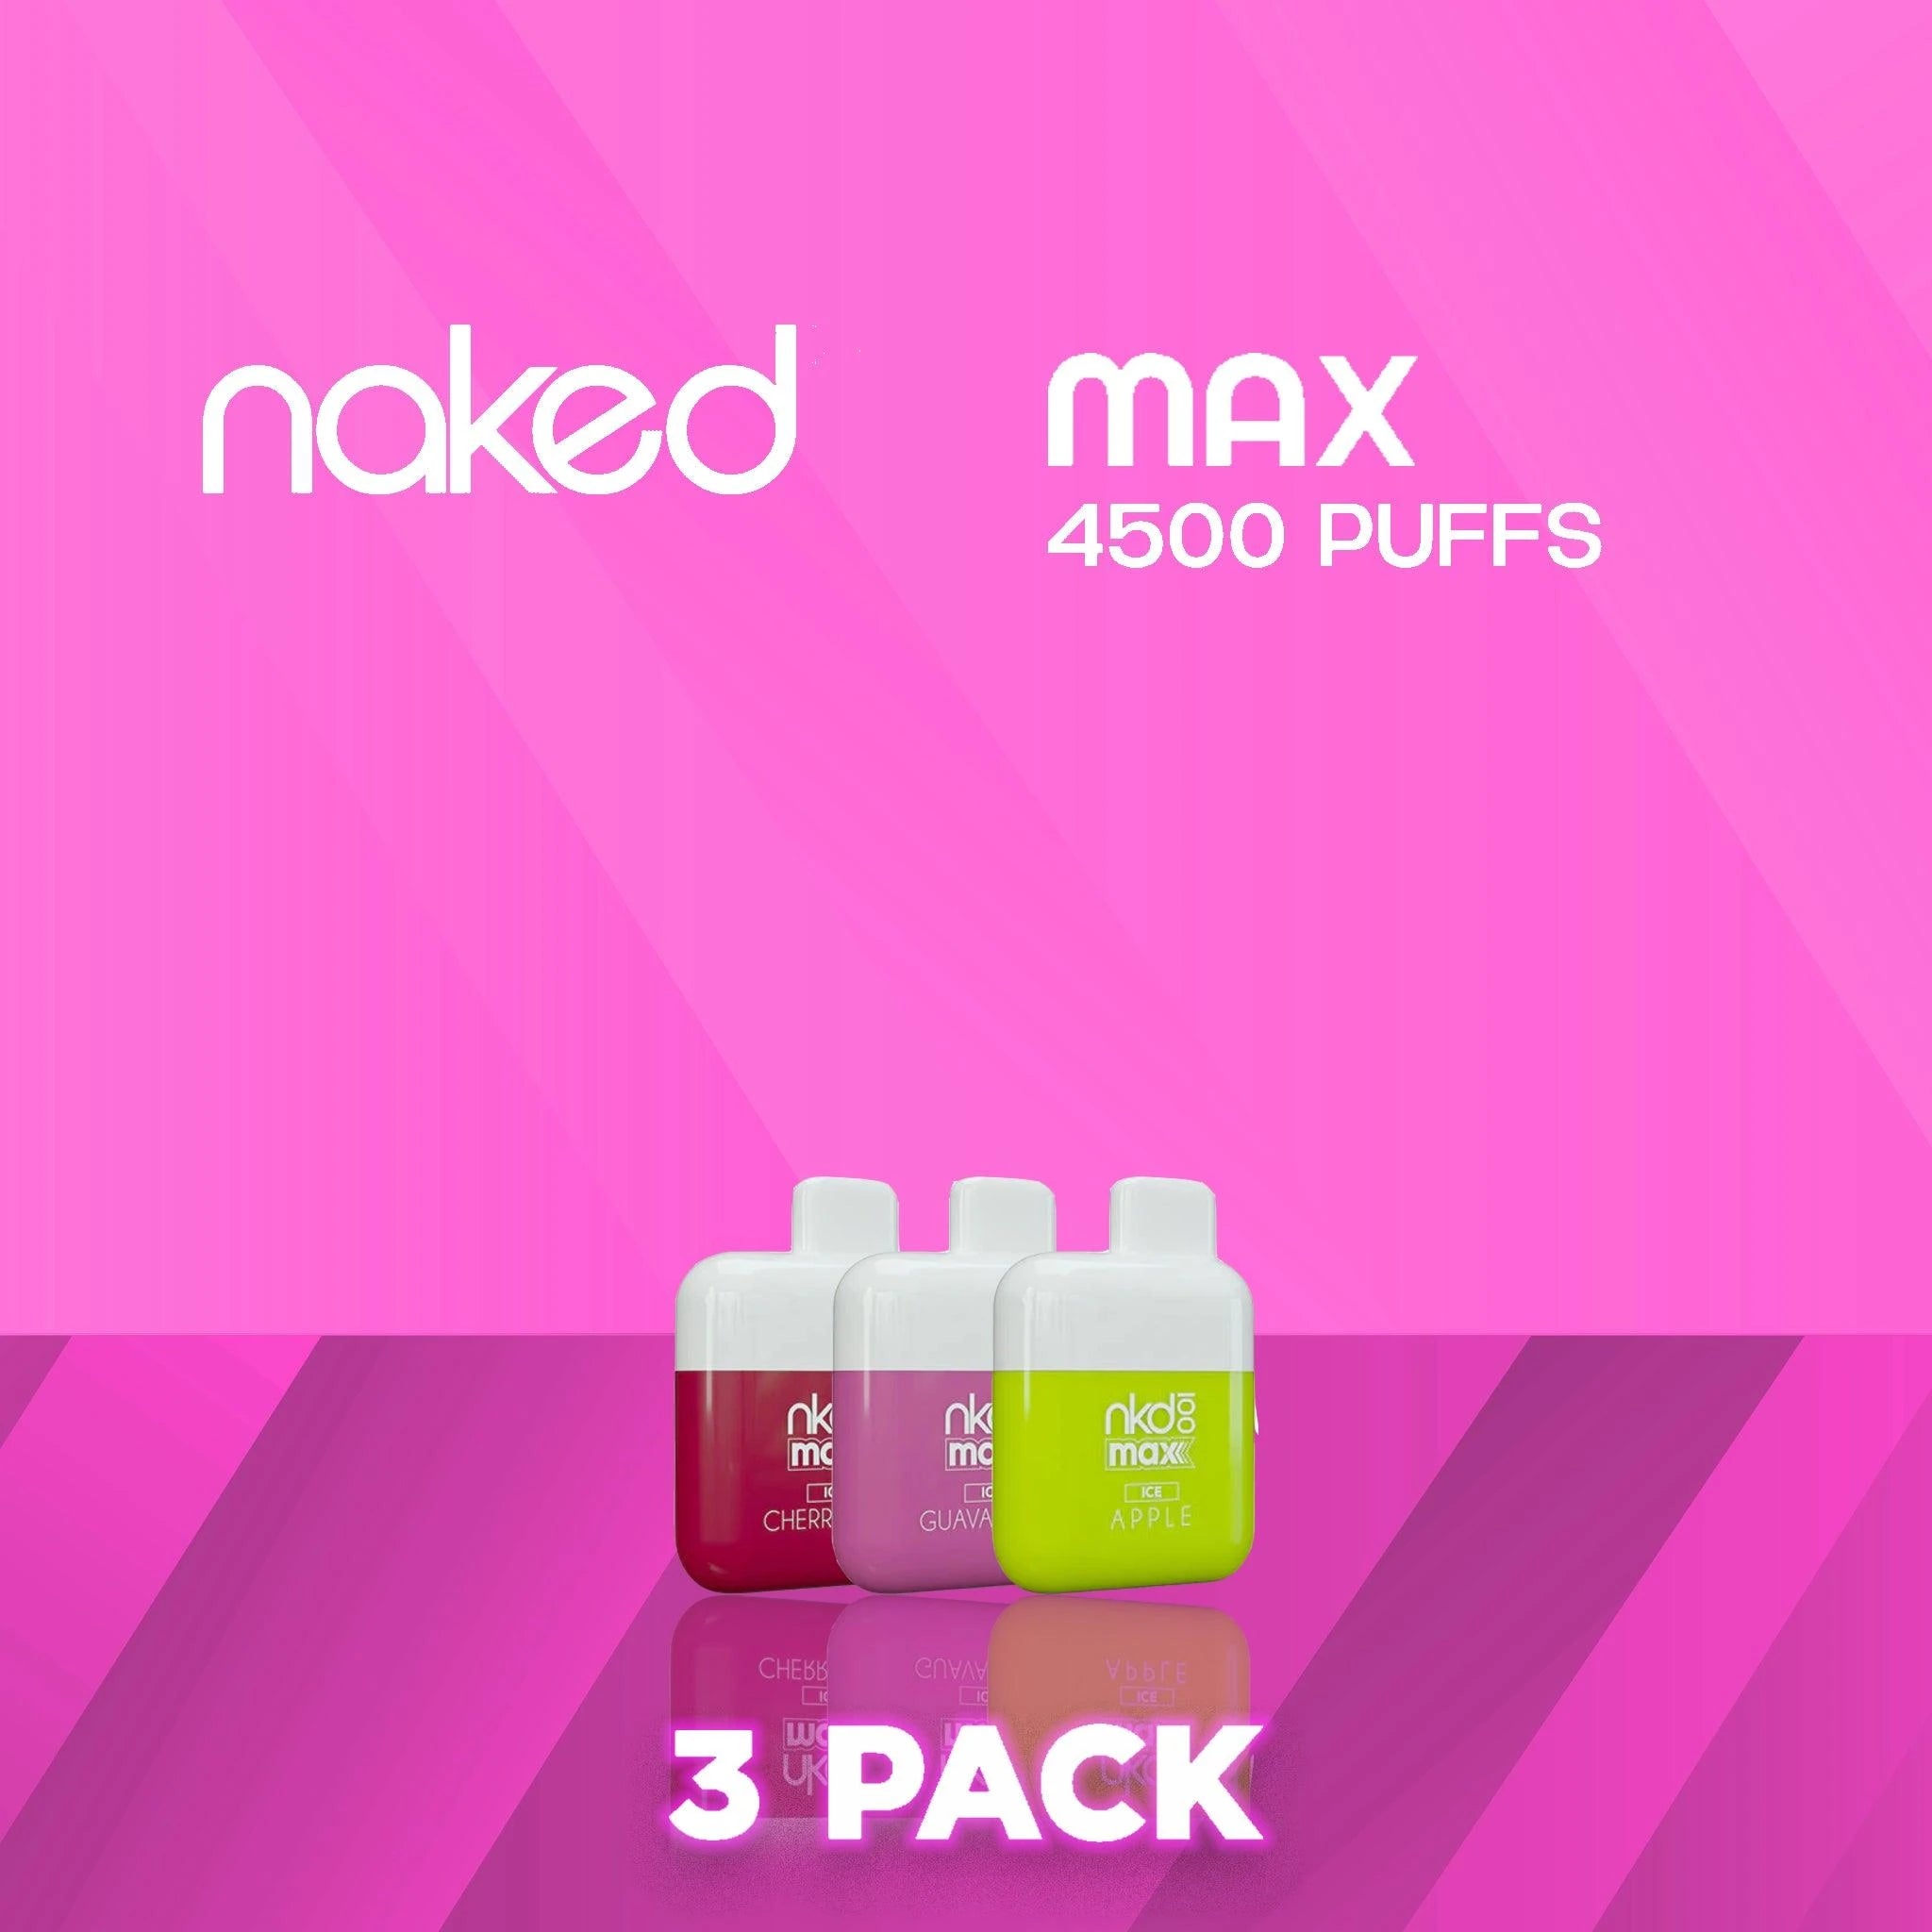 Naked 100 Max Disposable Vape 4500 Puffs - 3 Pack